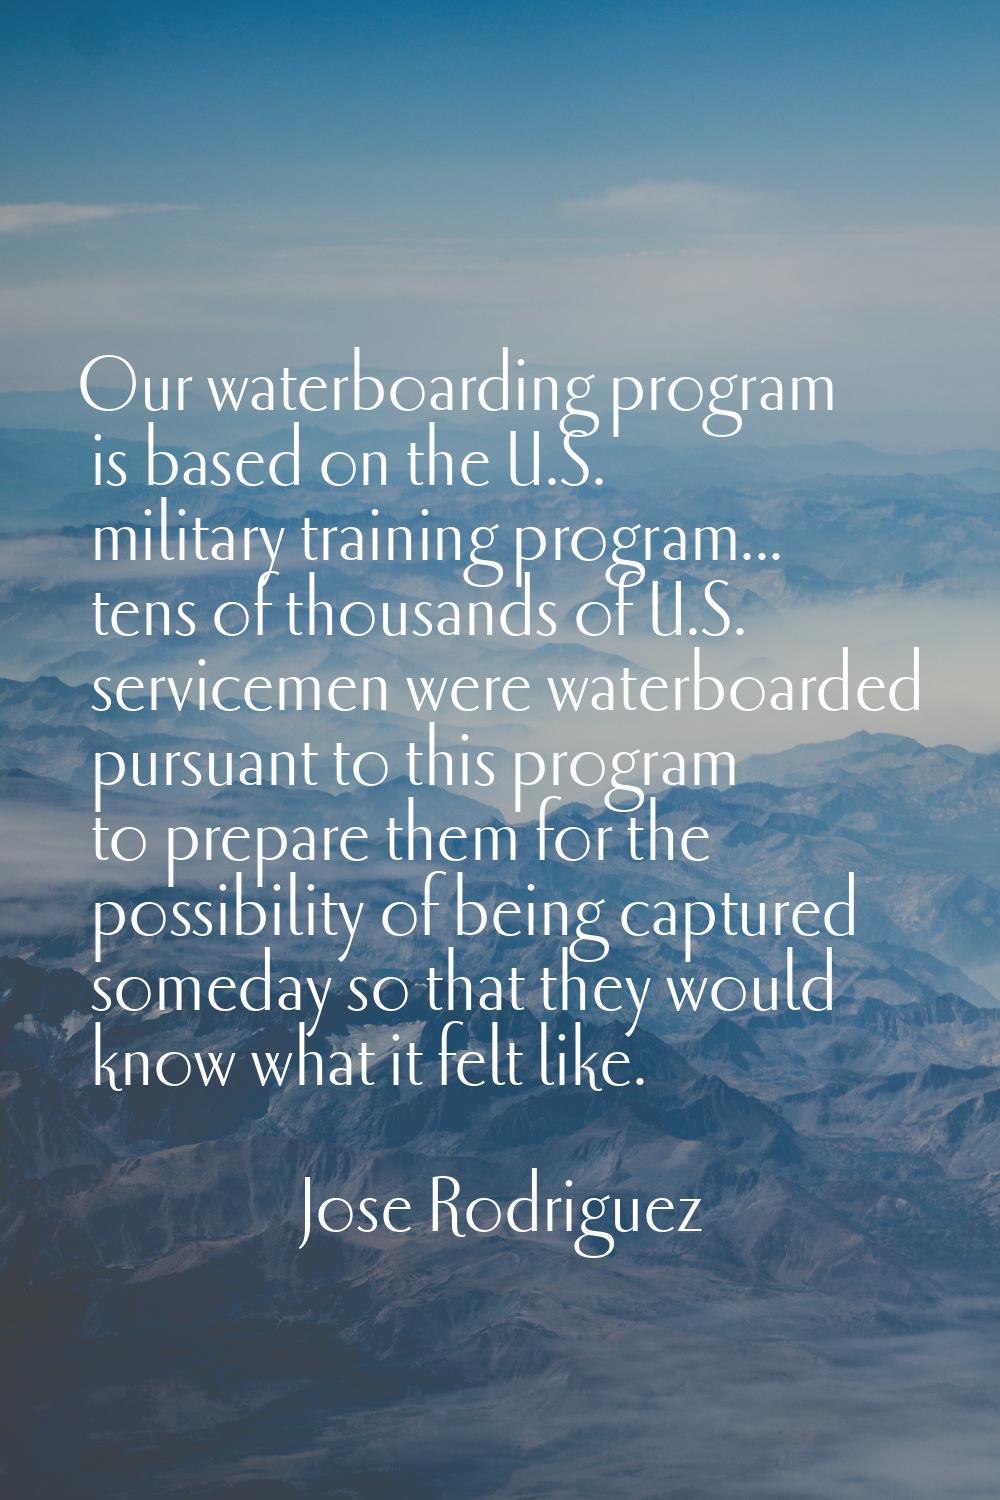 Our waterboarding program is based on the U.S. military training program... tens of thousands of U.